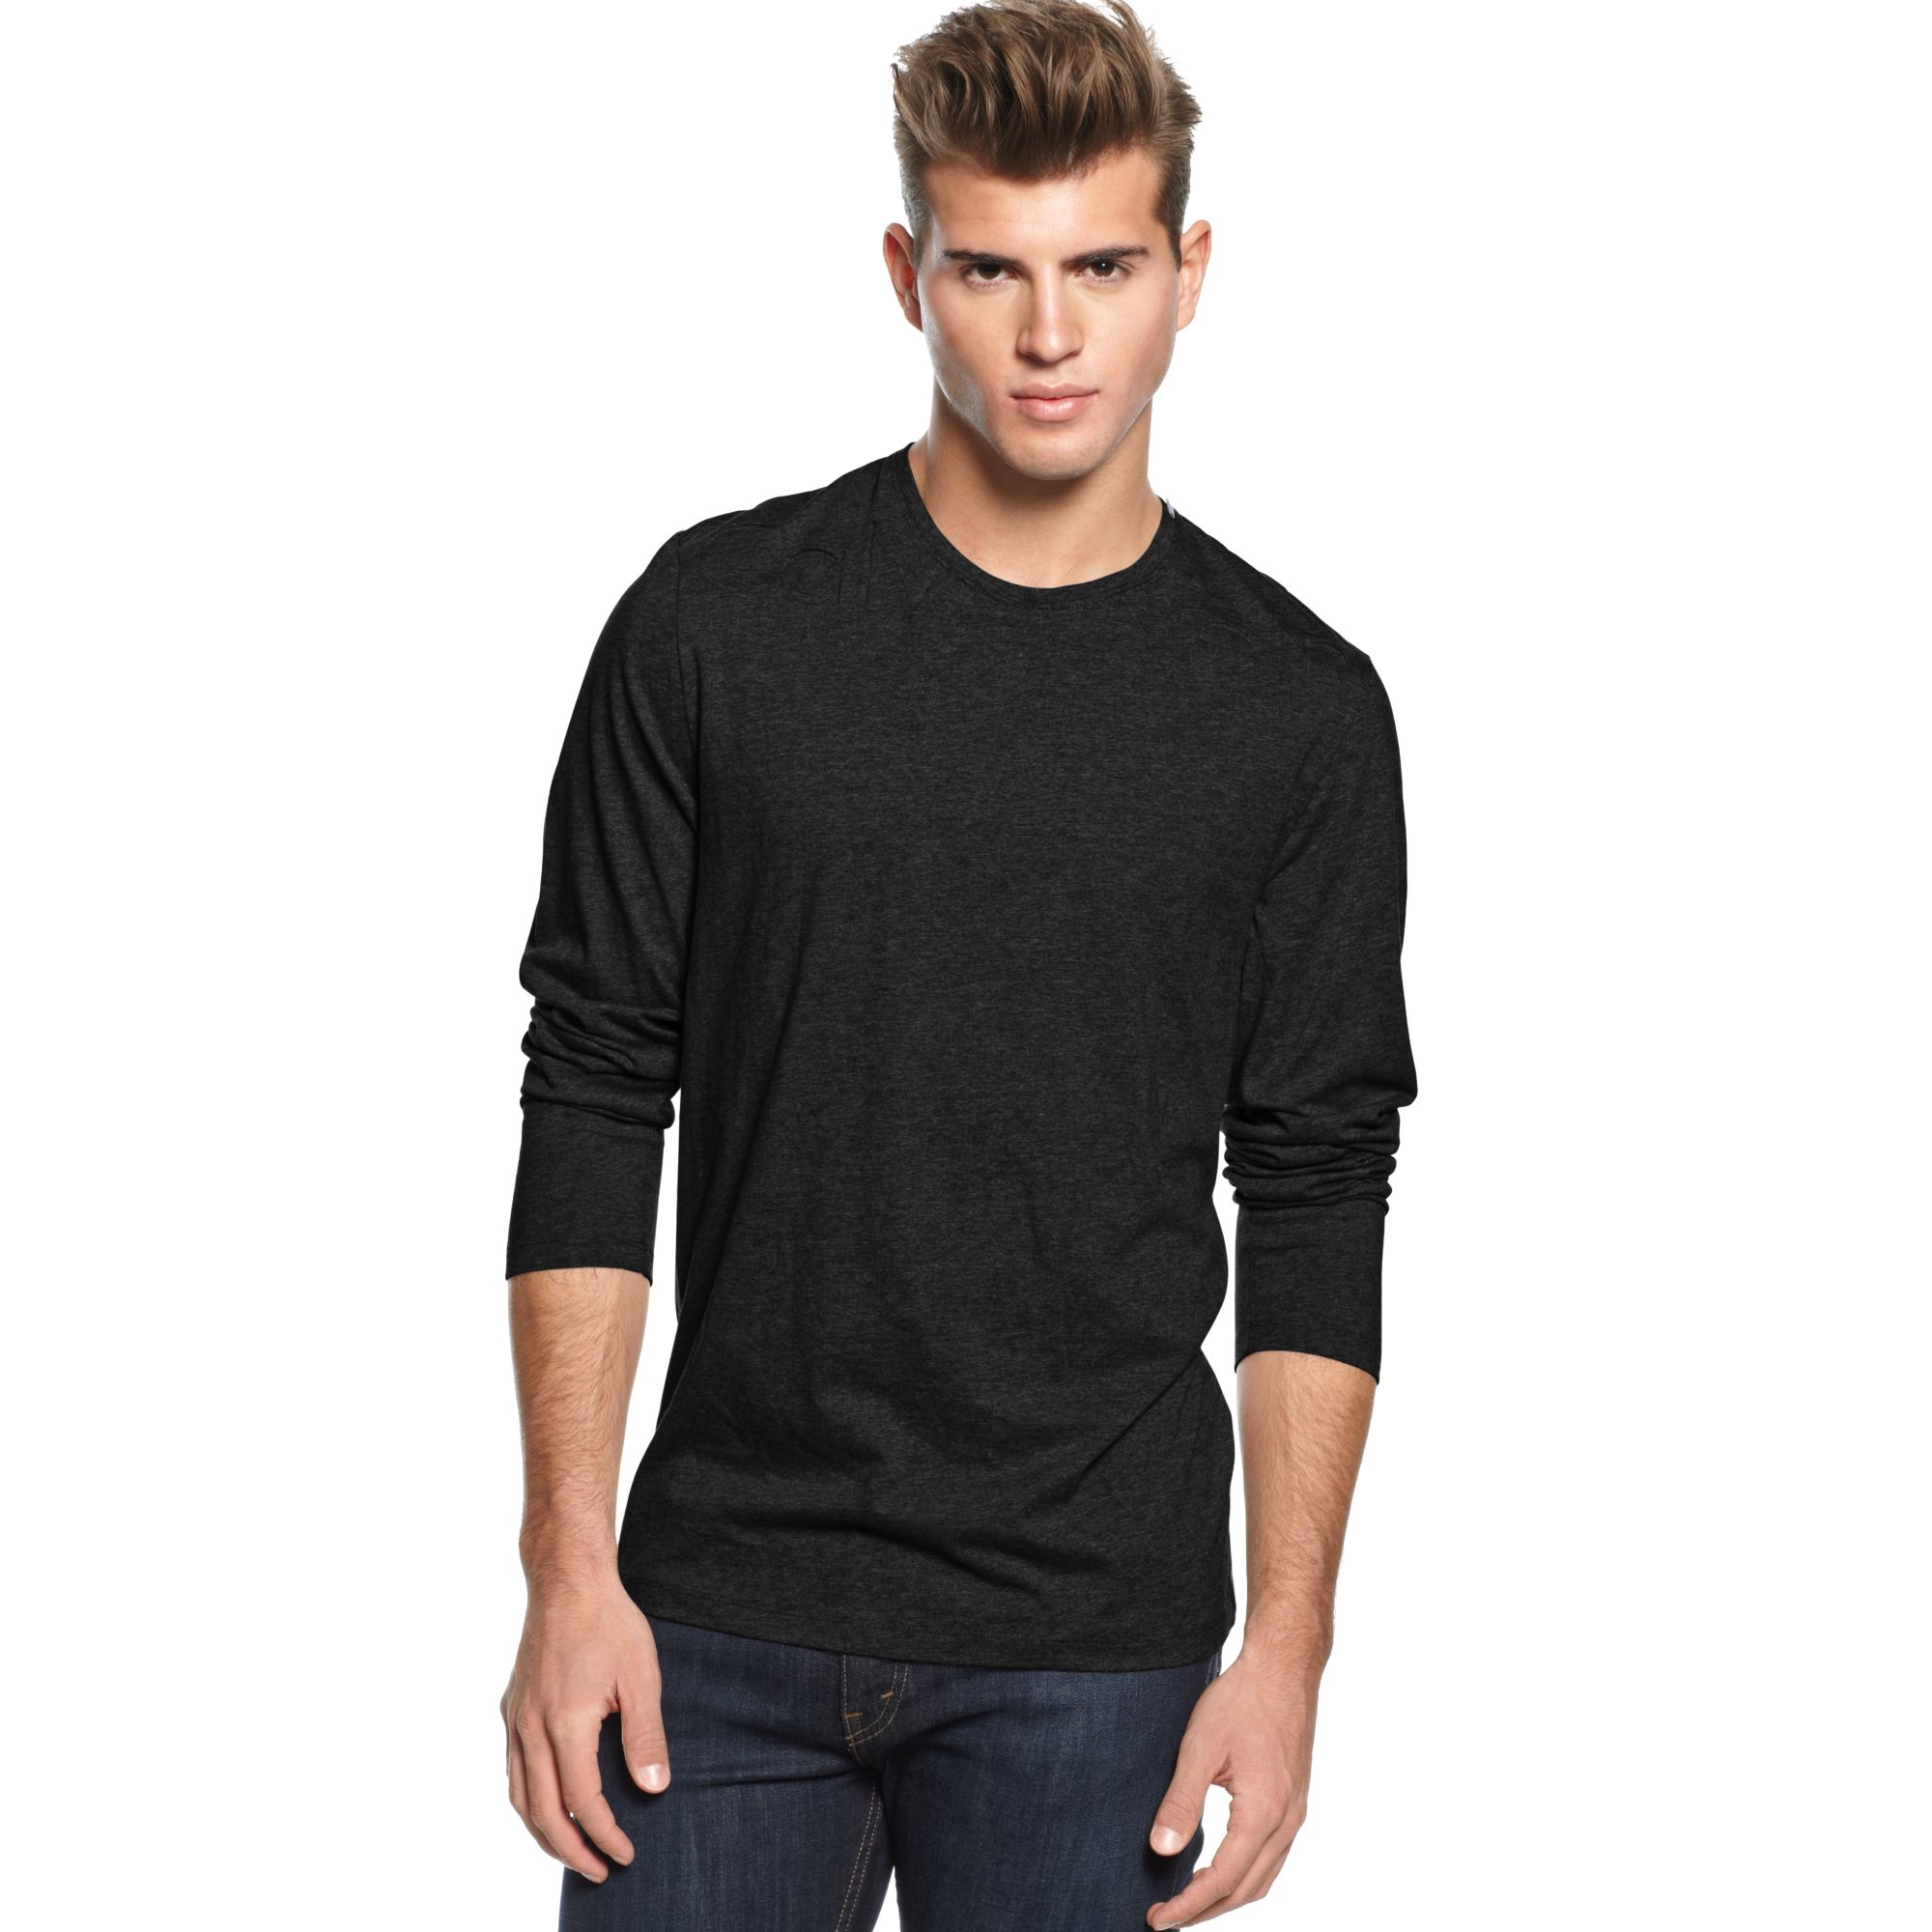 Shirts without collars that are a step above a basic t-shirt : r ...